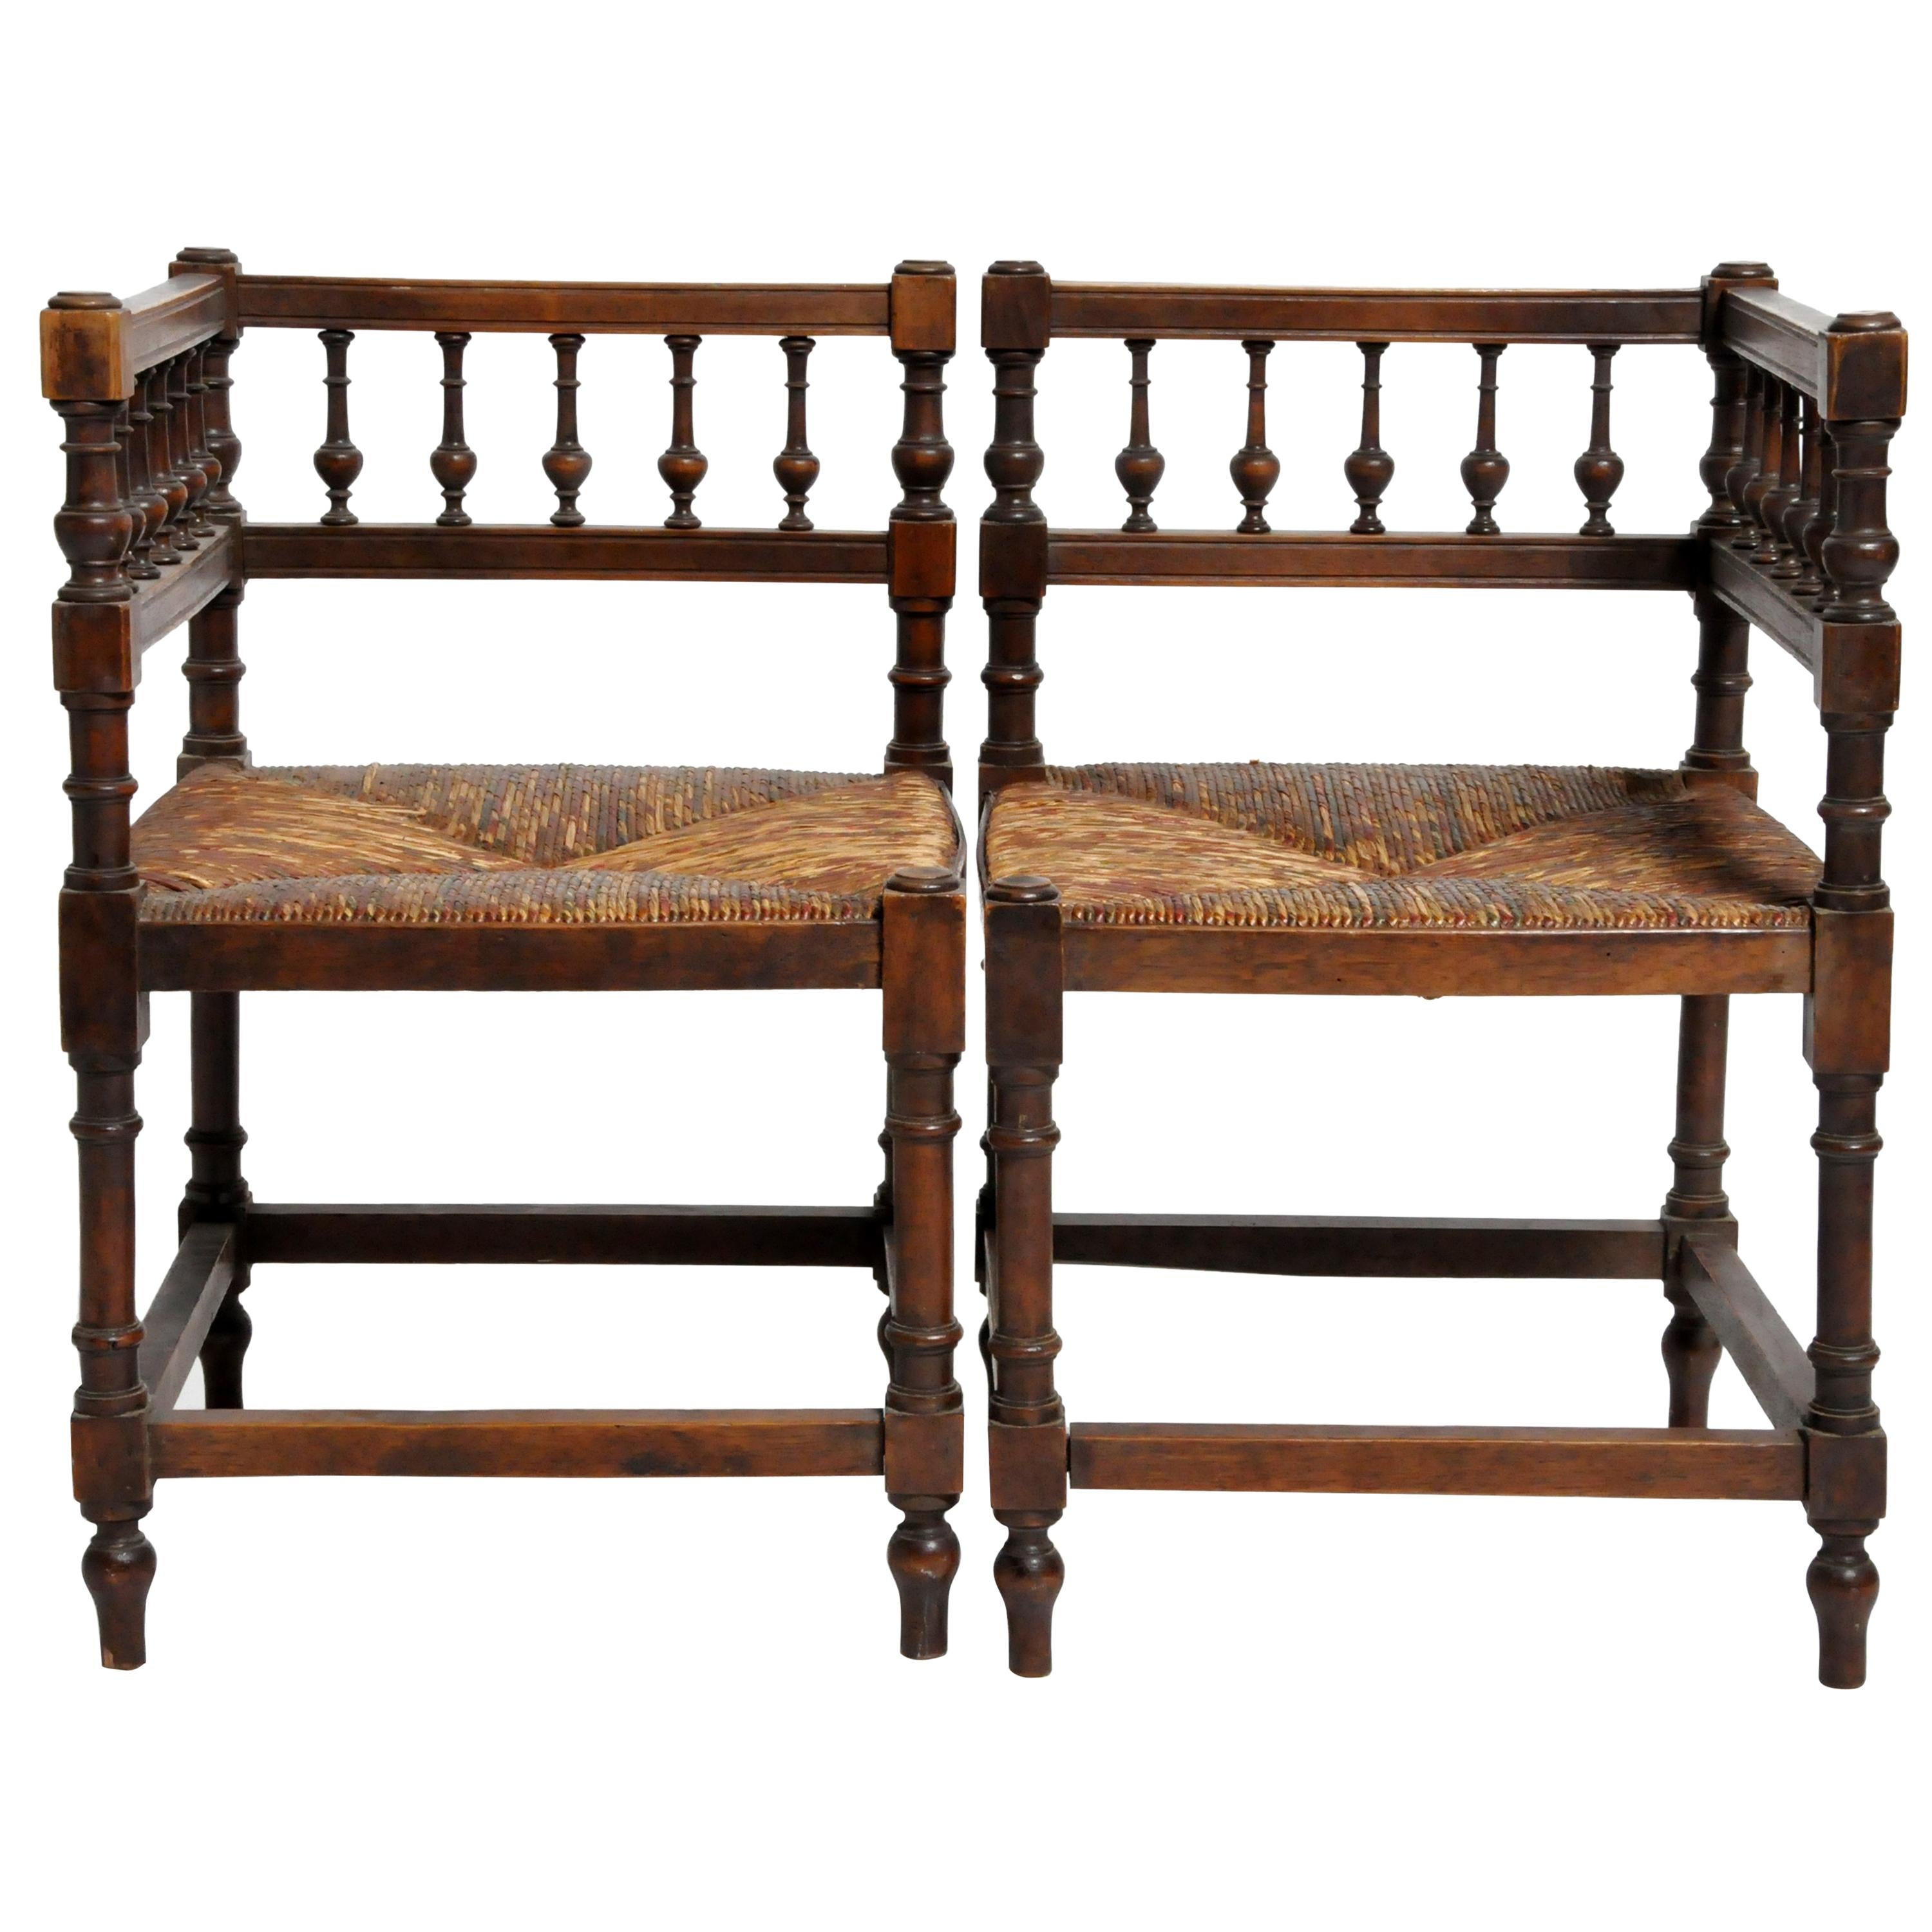 Pair of French Wooden Corner Chairs